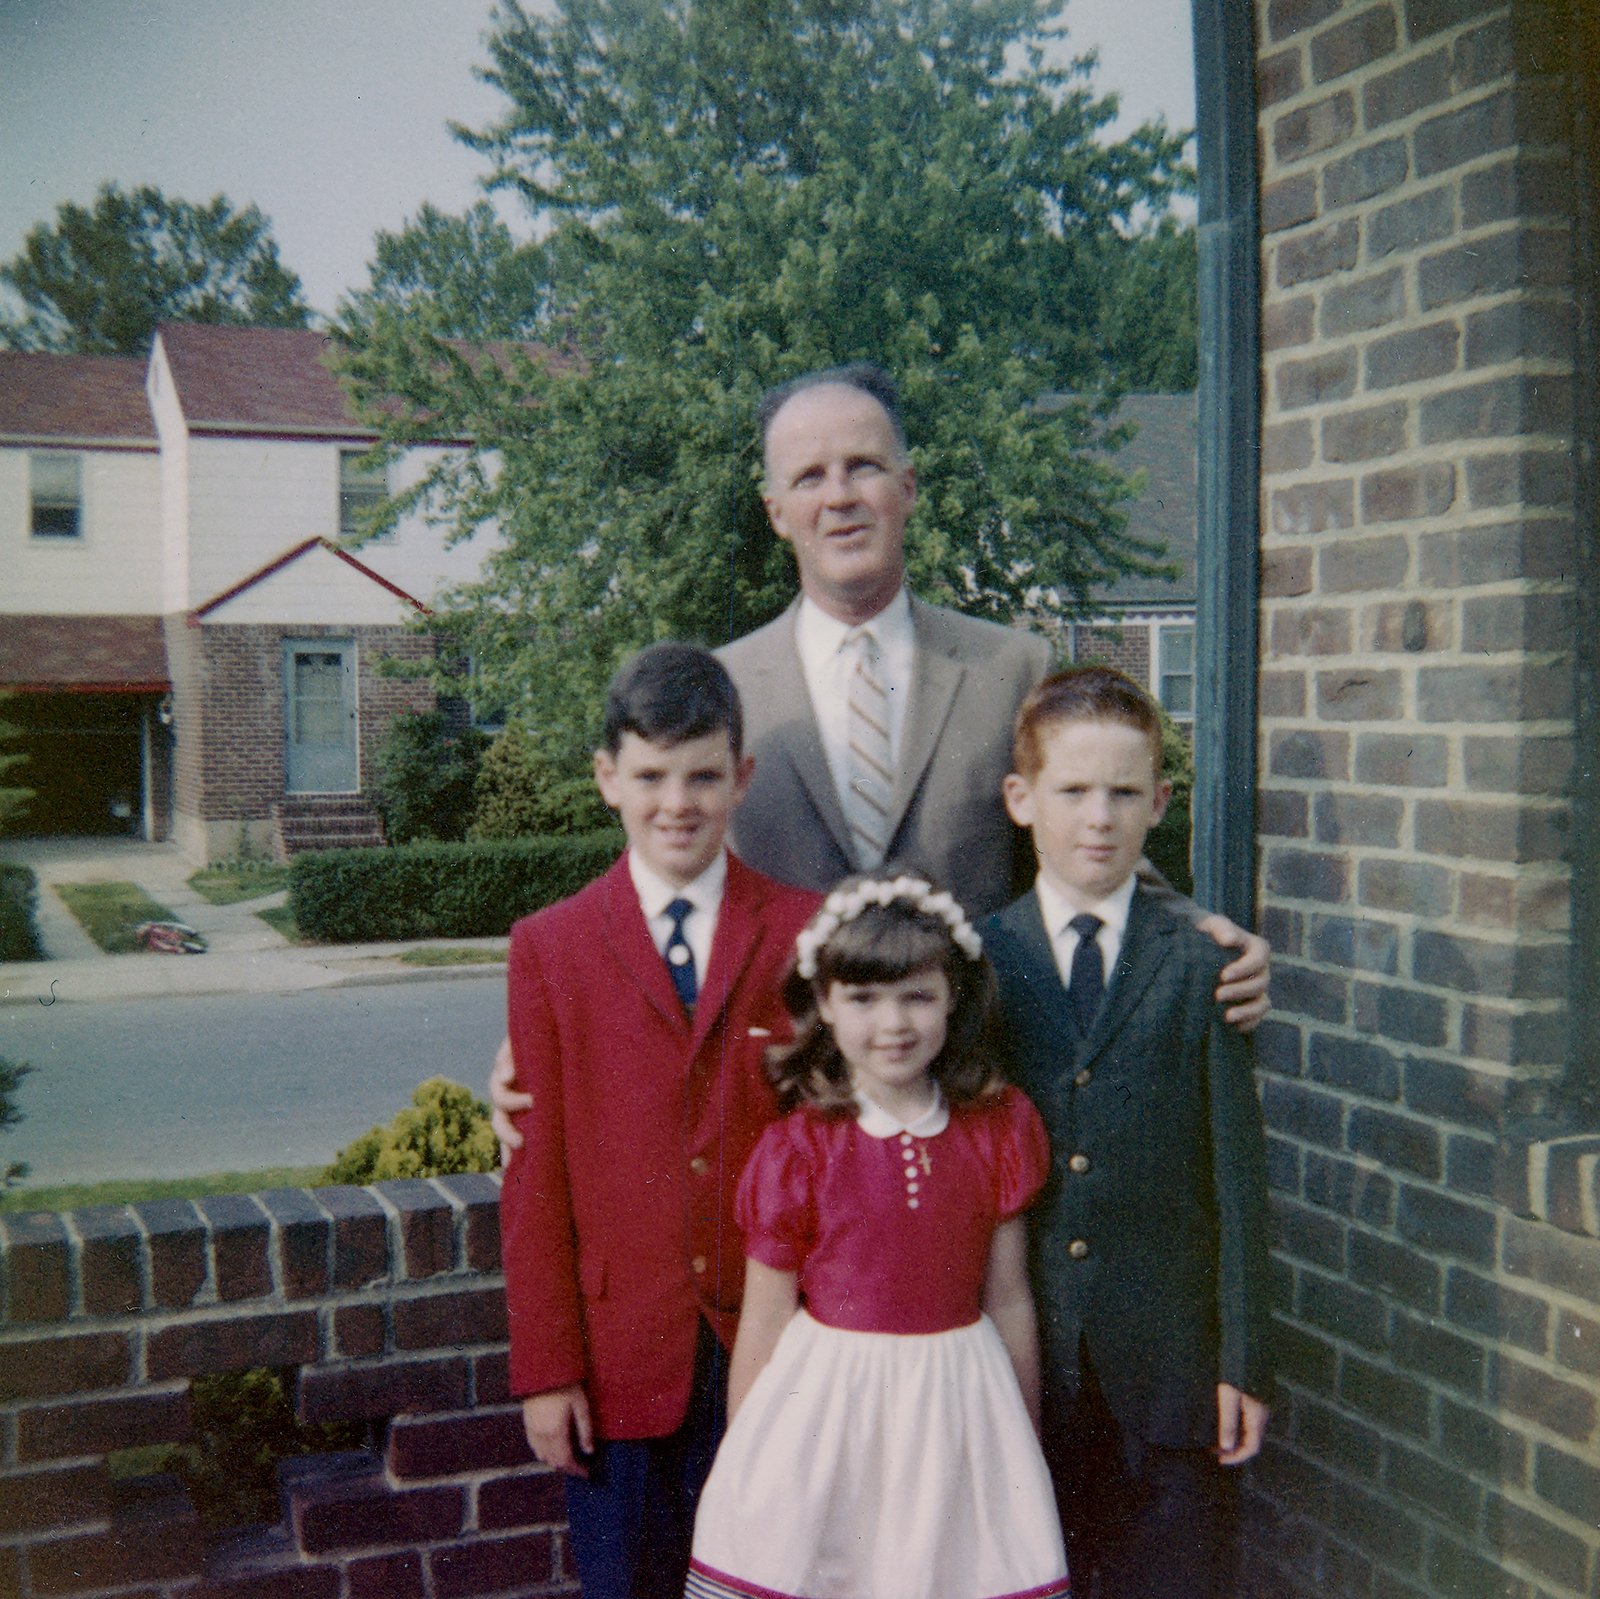 Alice's father William with Alice and her brothers Bill and Kevin (the redhead). Probably taken on the day of Kevin's confirmation. Taken in Elmont, Long Island, New York, probably 1961.